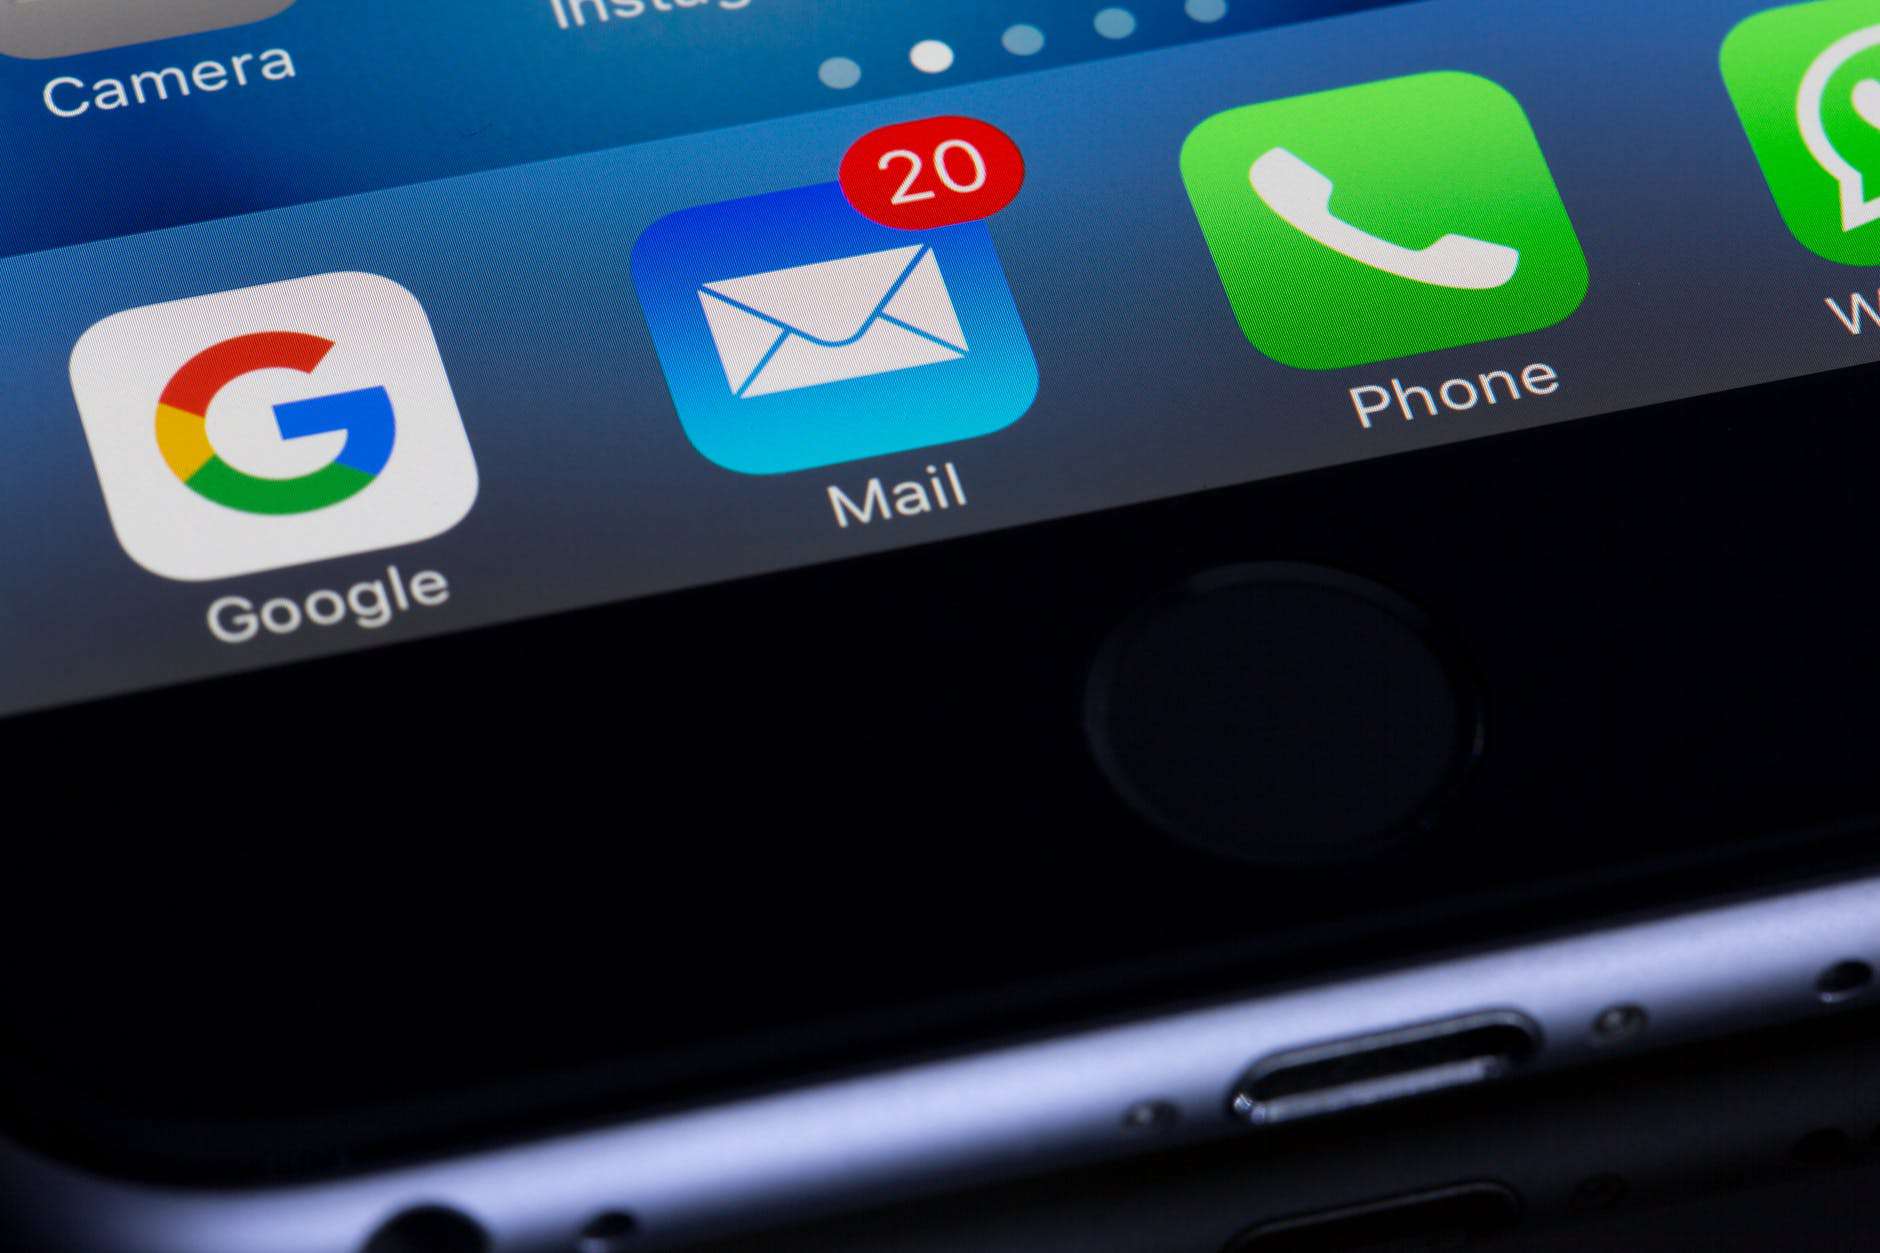 An iPhone screen that is zoomed in on the dock which has the Google app, mail app and phone app.